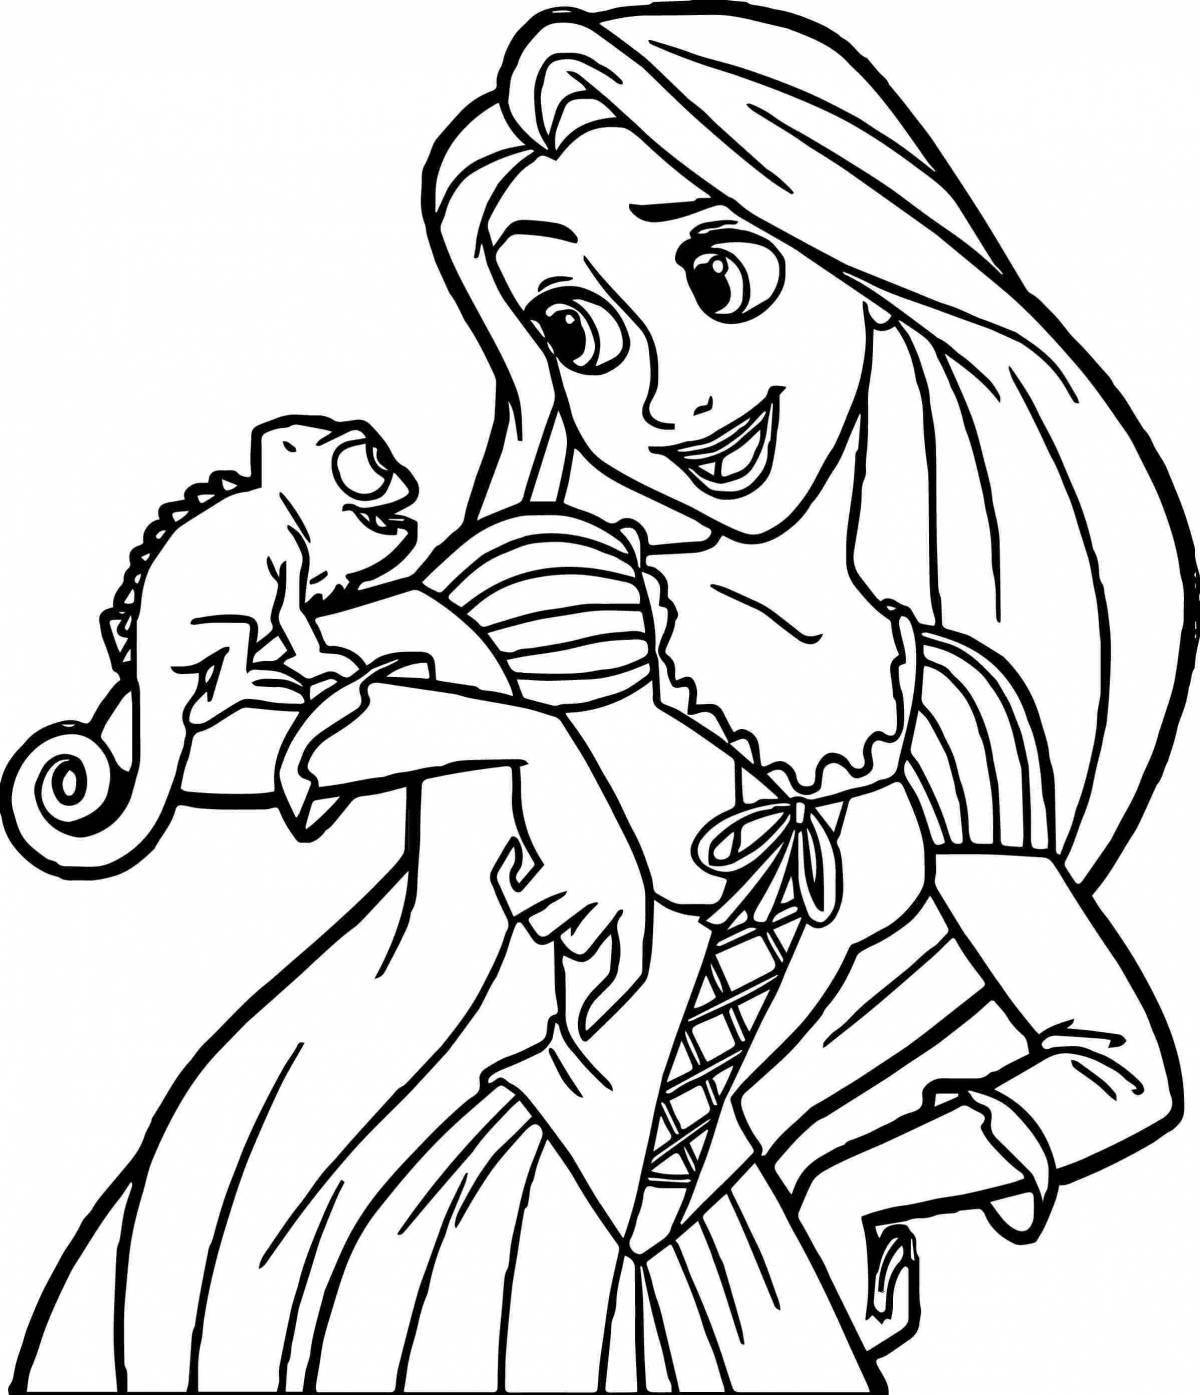 Tangled sparkling coloring book for kids 5-6 years old